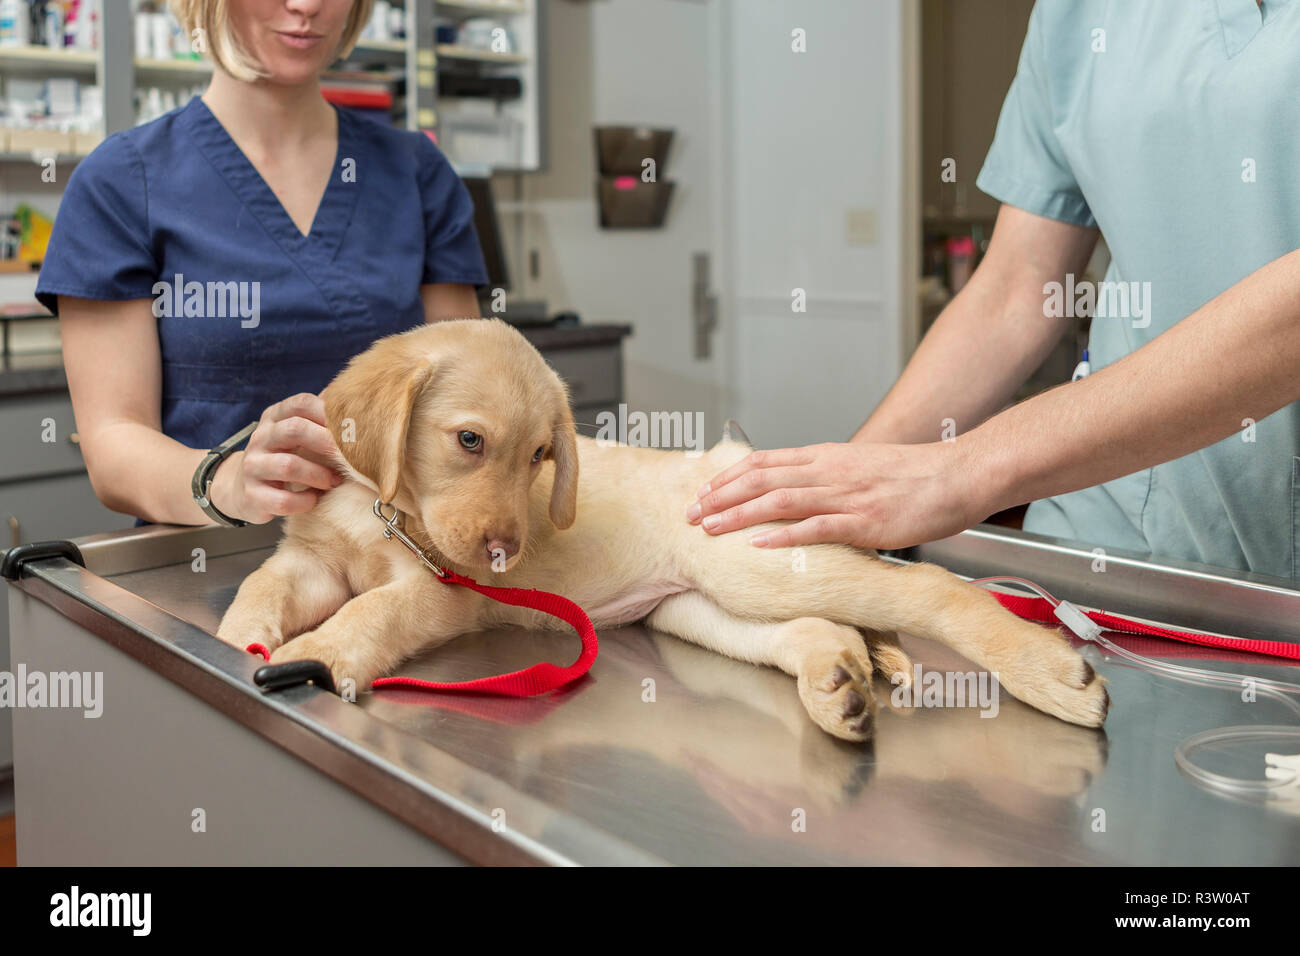 An adorable puppy resting on an examination table in a veterinary clinic Stock Photo